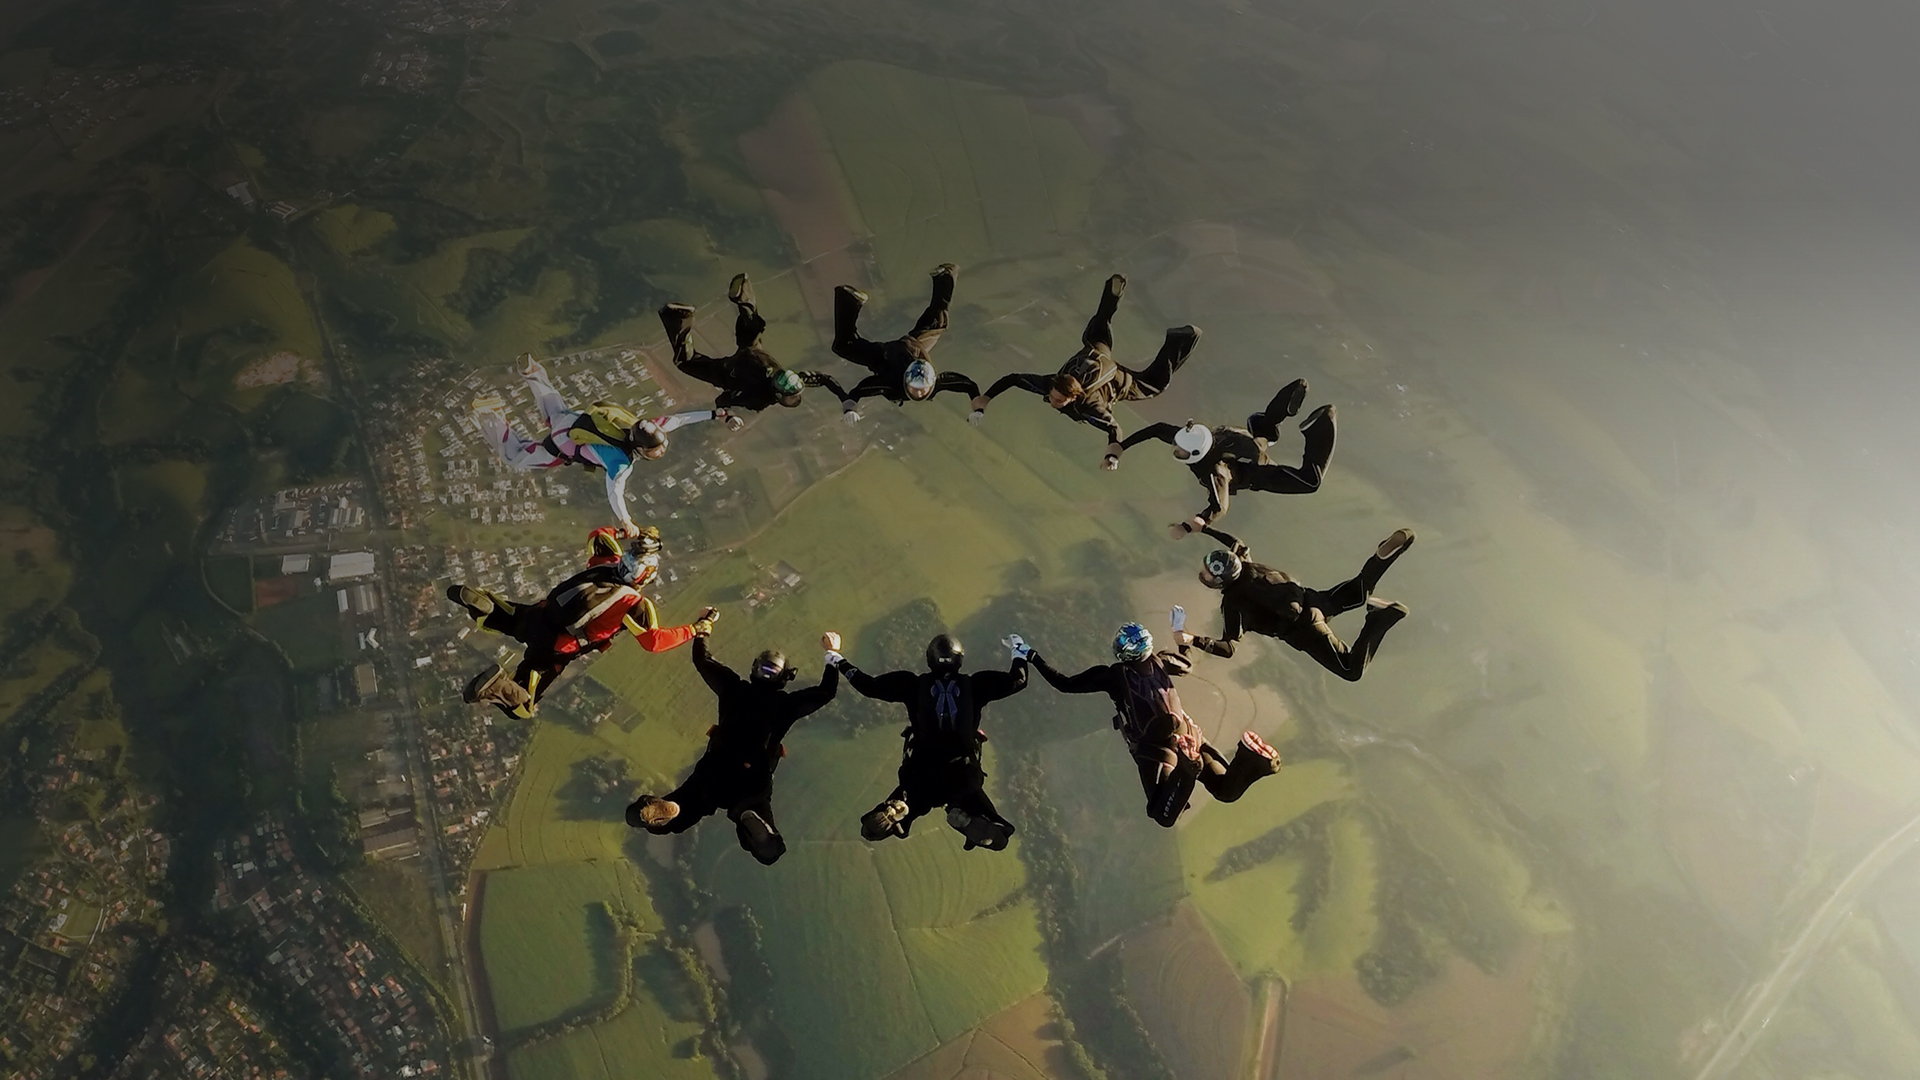 Ten people in a circular formation, flying in the air before their parachutes open.